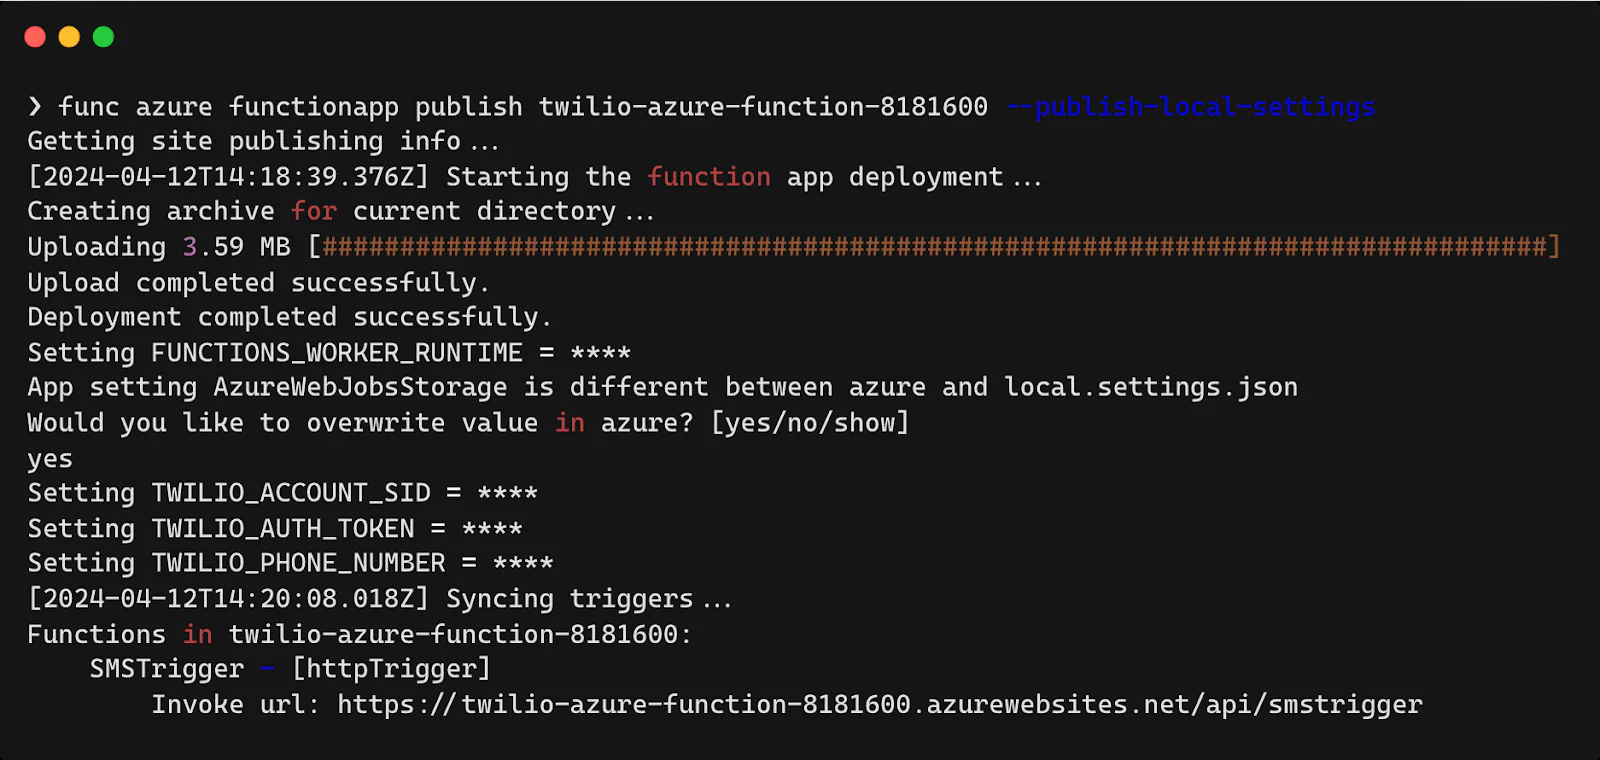 Azure Functions CLI functionapp publish command output.